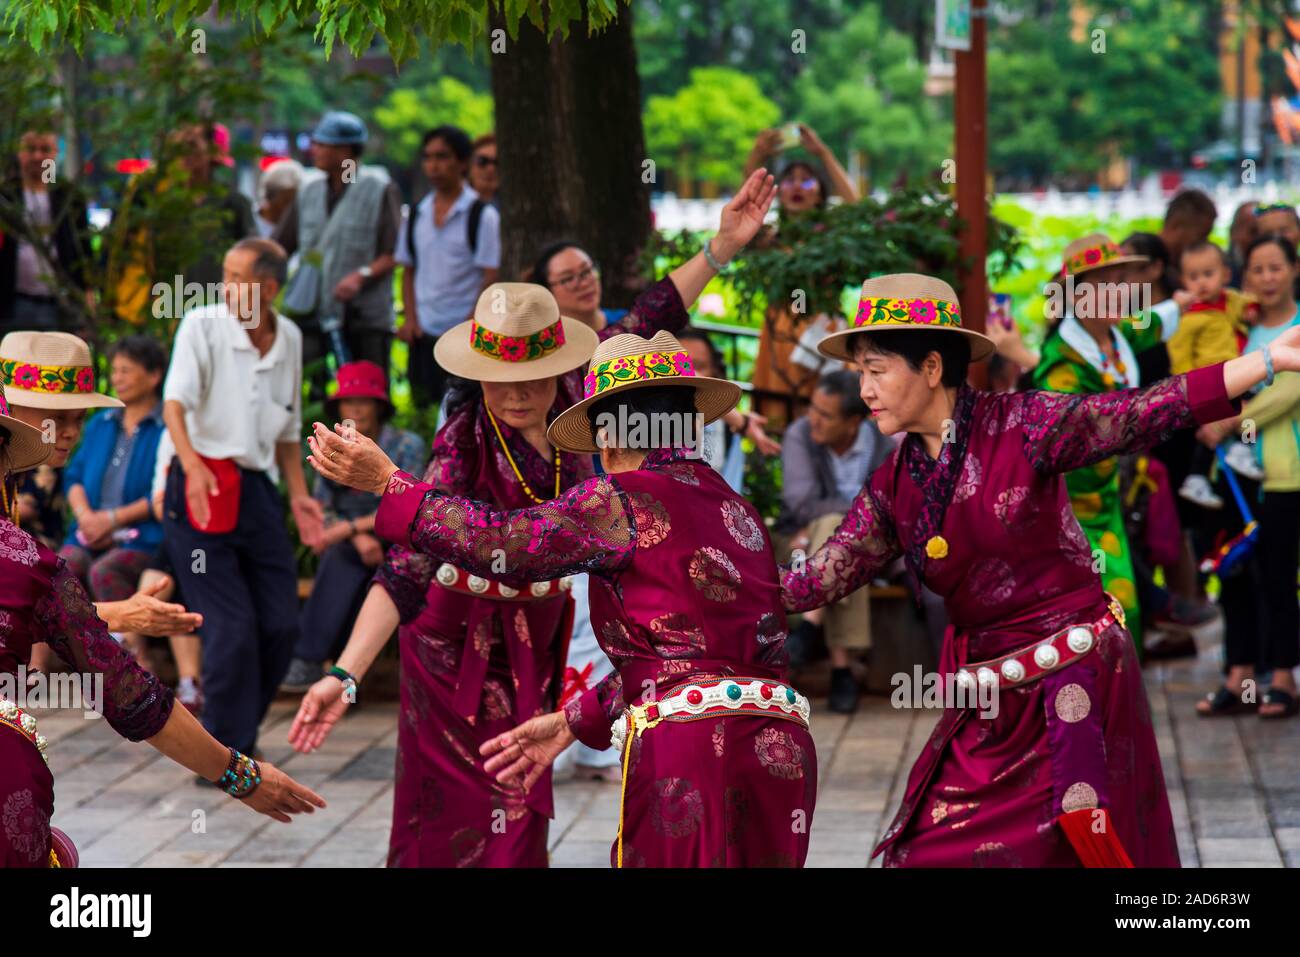 Kunming, China - 12 July 2019: Chinese people dancing on the public square in the park wearing ethnic minority clothes in Kunming, Yunnan province Stock Photo